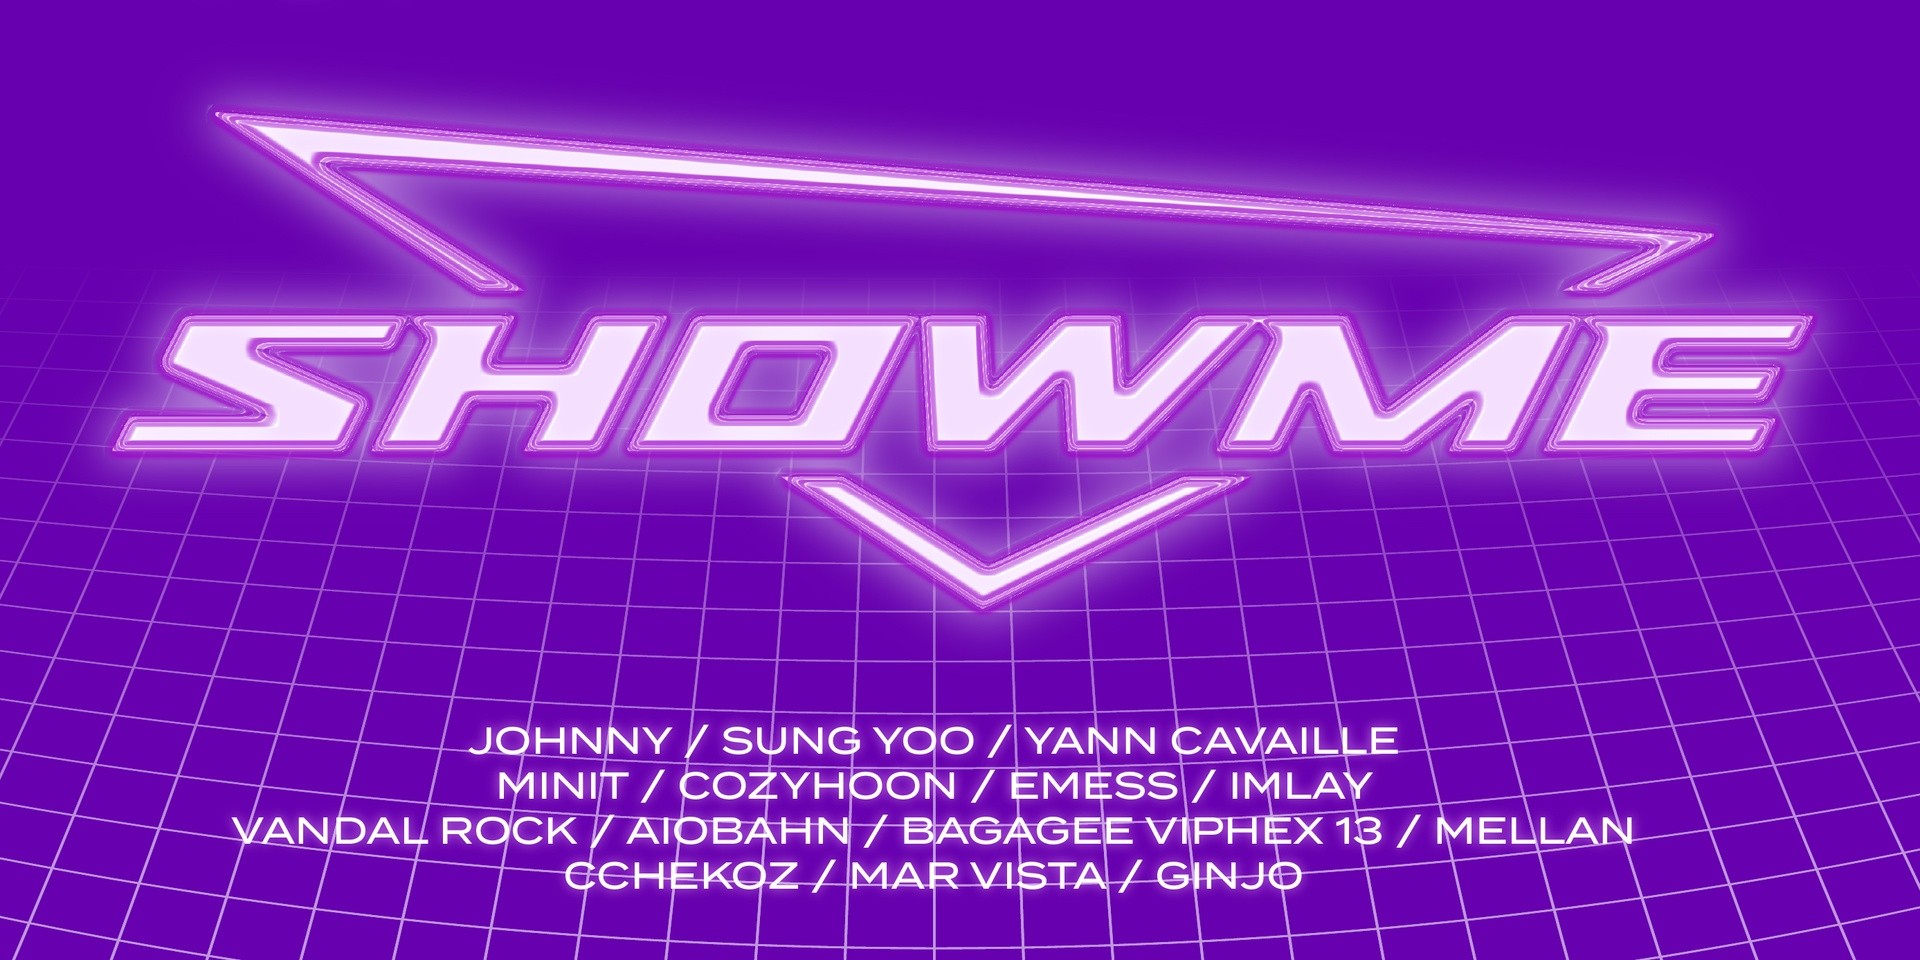 ScreaM Records announce new season of 'SHOWME' featuring NCT's Johnny, Yann Caville, Cozyhoon, and more